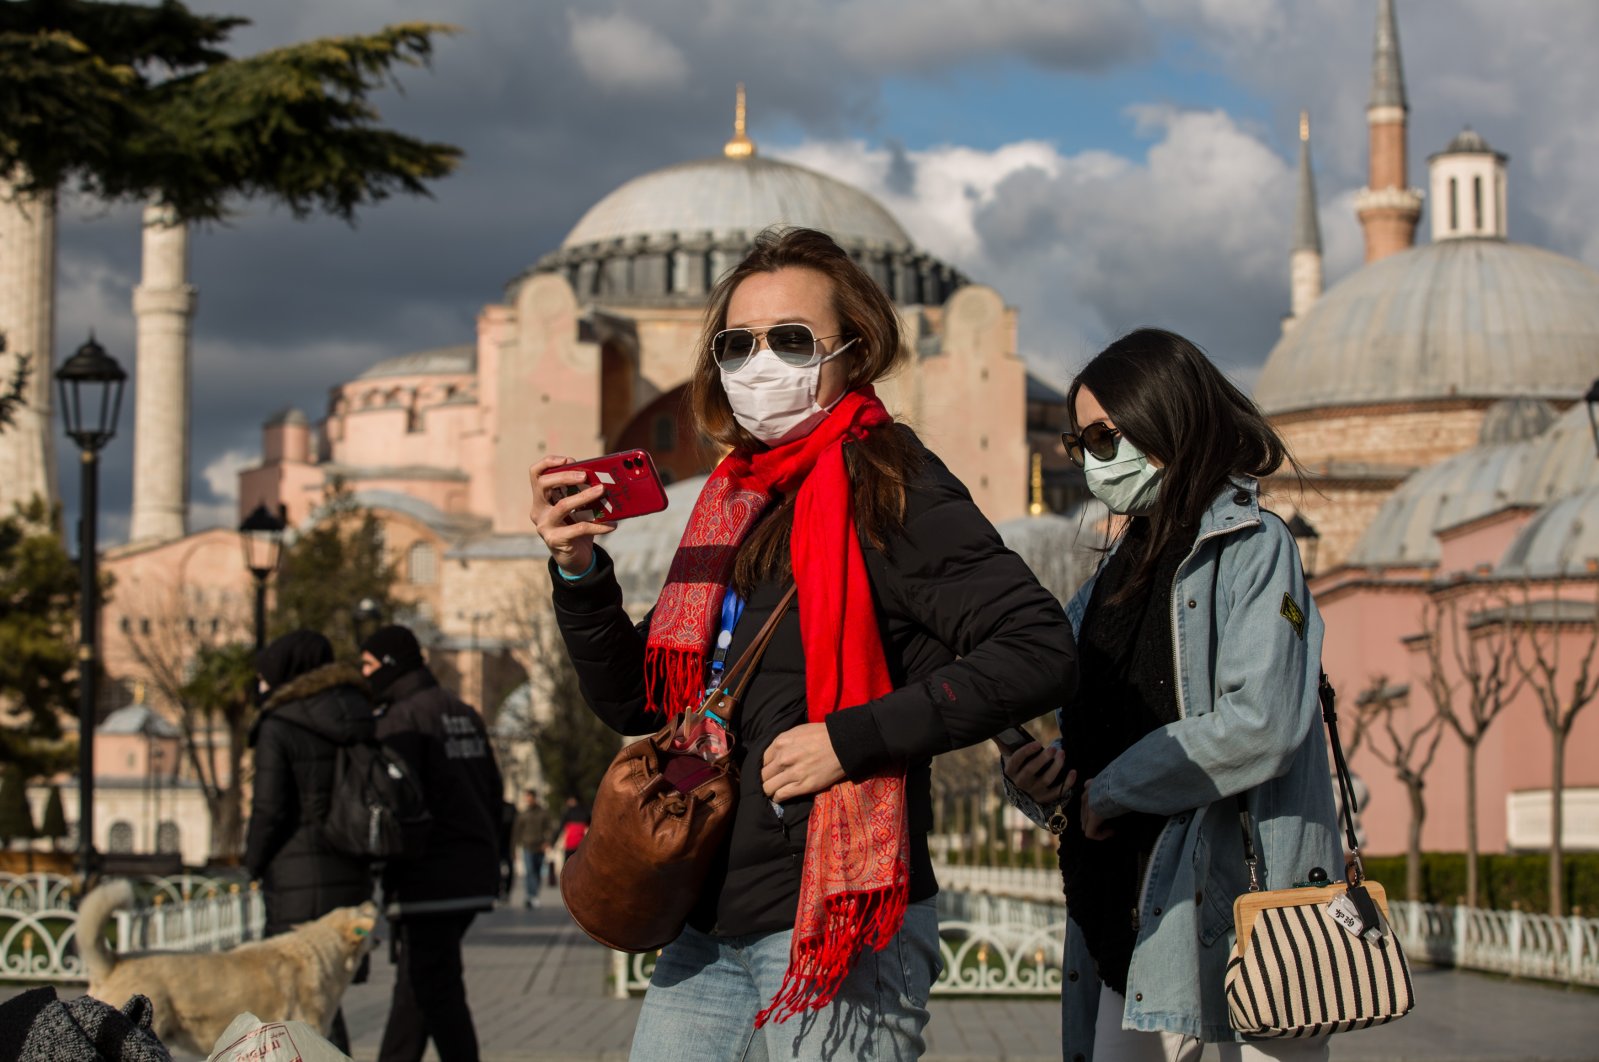 Tourists wearing protective face masks due to coronavirus concerns stroll in Sultanahmet Square in Istanbul, Turkey, Wednesday, March 18, 2020. The Byzantine-era monument of Hagia Sophia is seen in the background. (DHA Photo)